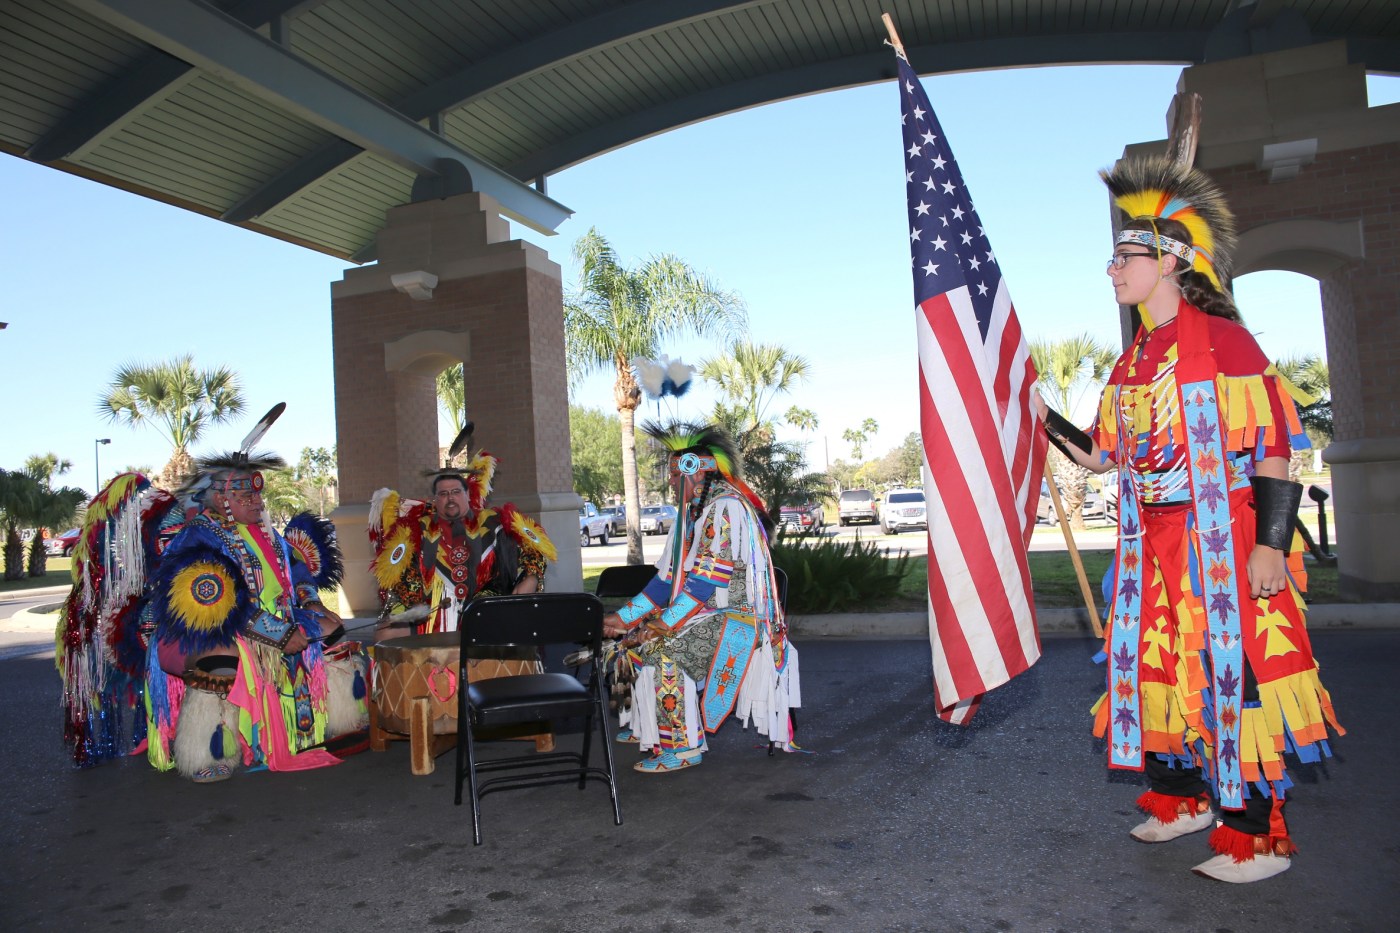 A young male member of the Lipan Apache Tribe of Texas raises the U.S. flag while other tribe members play and sing in a drum circle during a special event held in observance of National Native American Heritage Month, which took place at the VA outpatient clinic in Harlingen, Texas, on November 16, 2018. (U.S. Department of Veterans Affairs photo by Luis H. Loza Gutierrez)